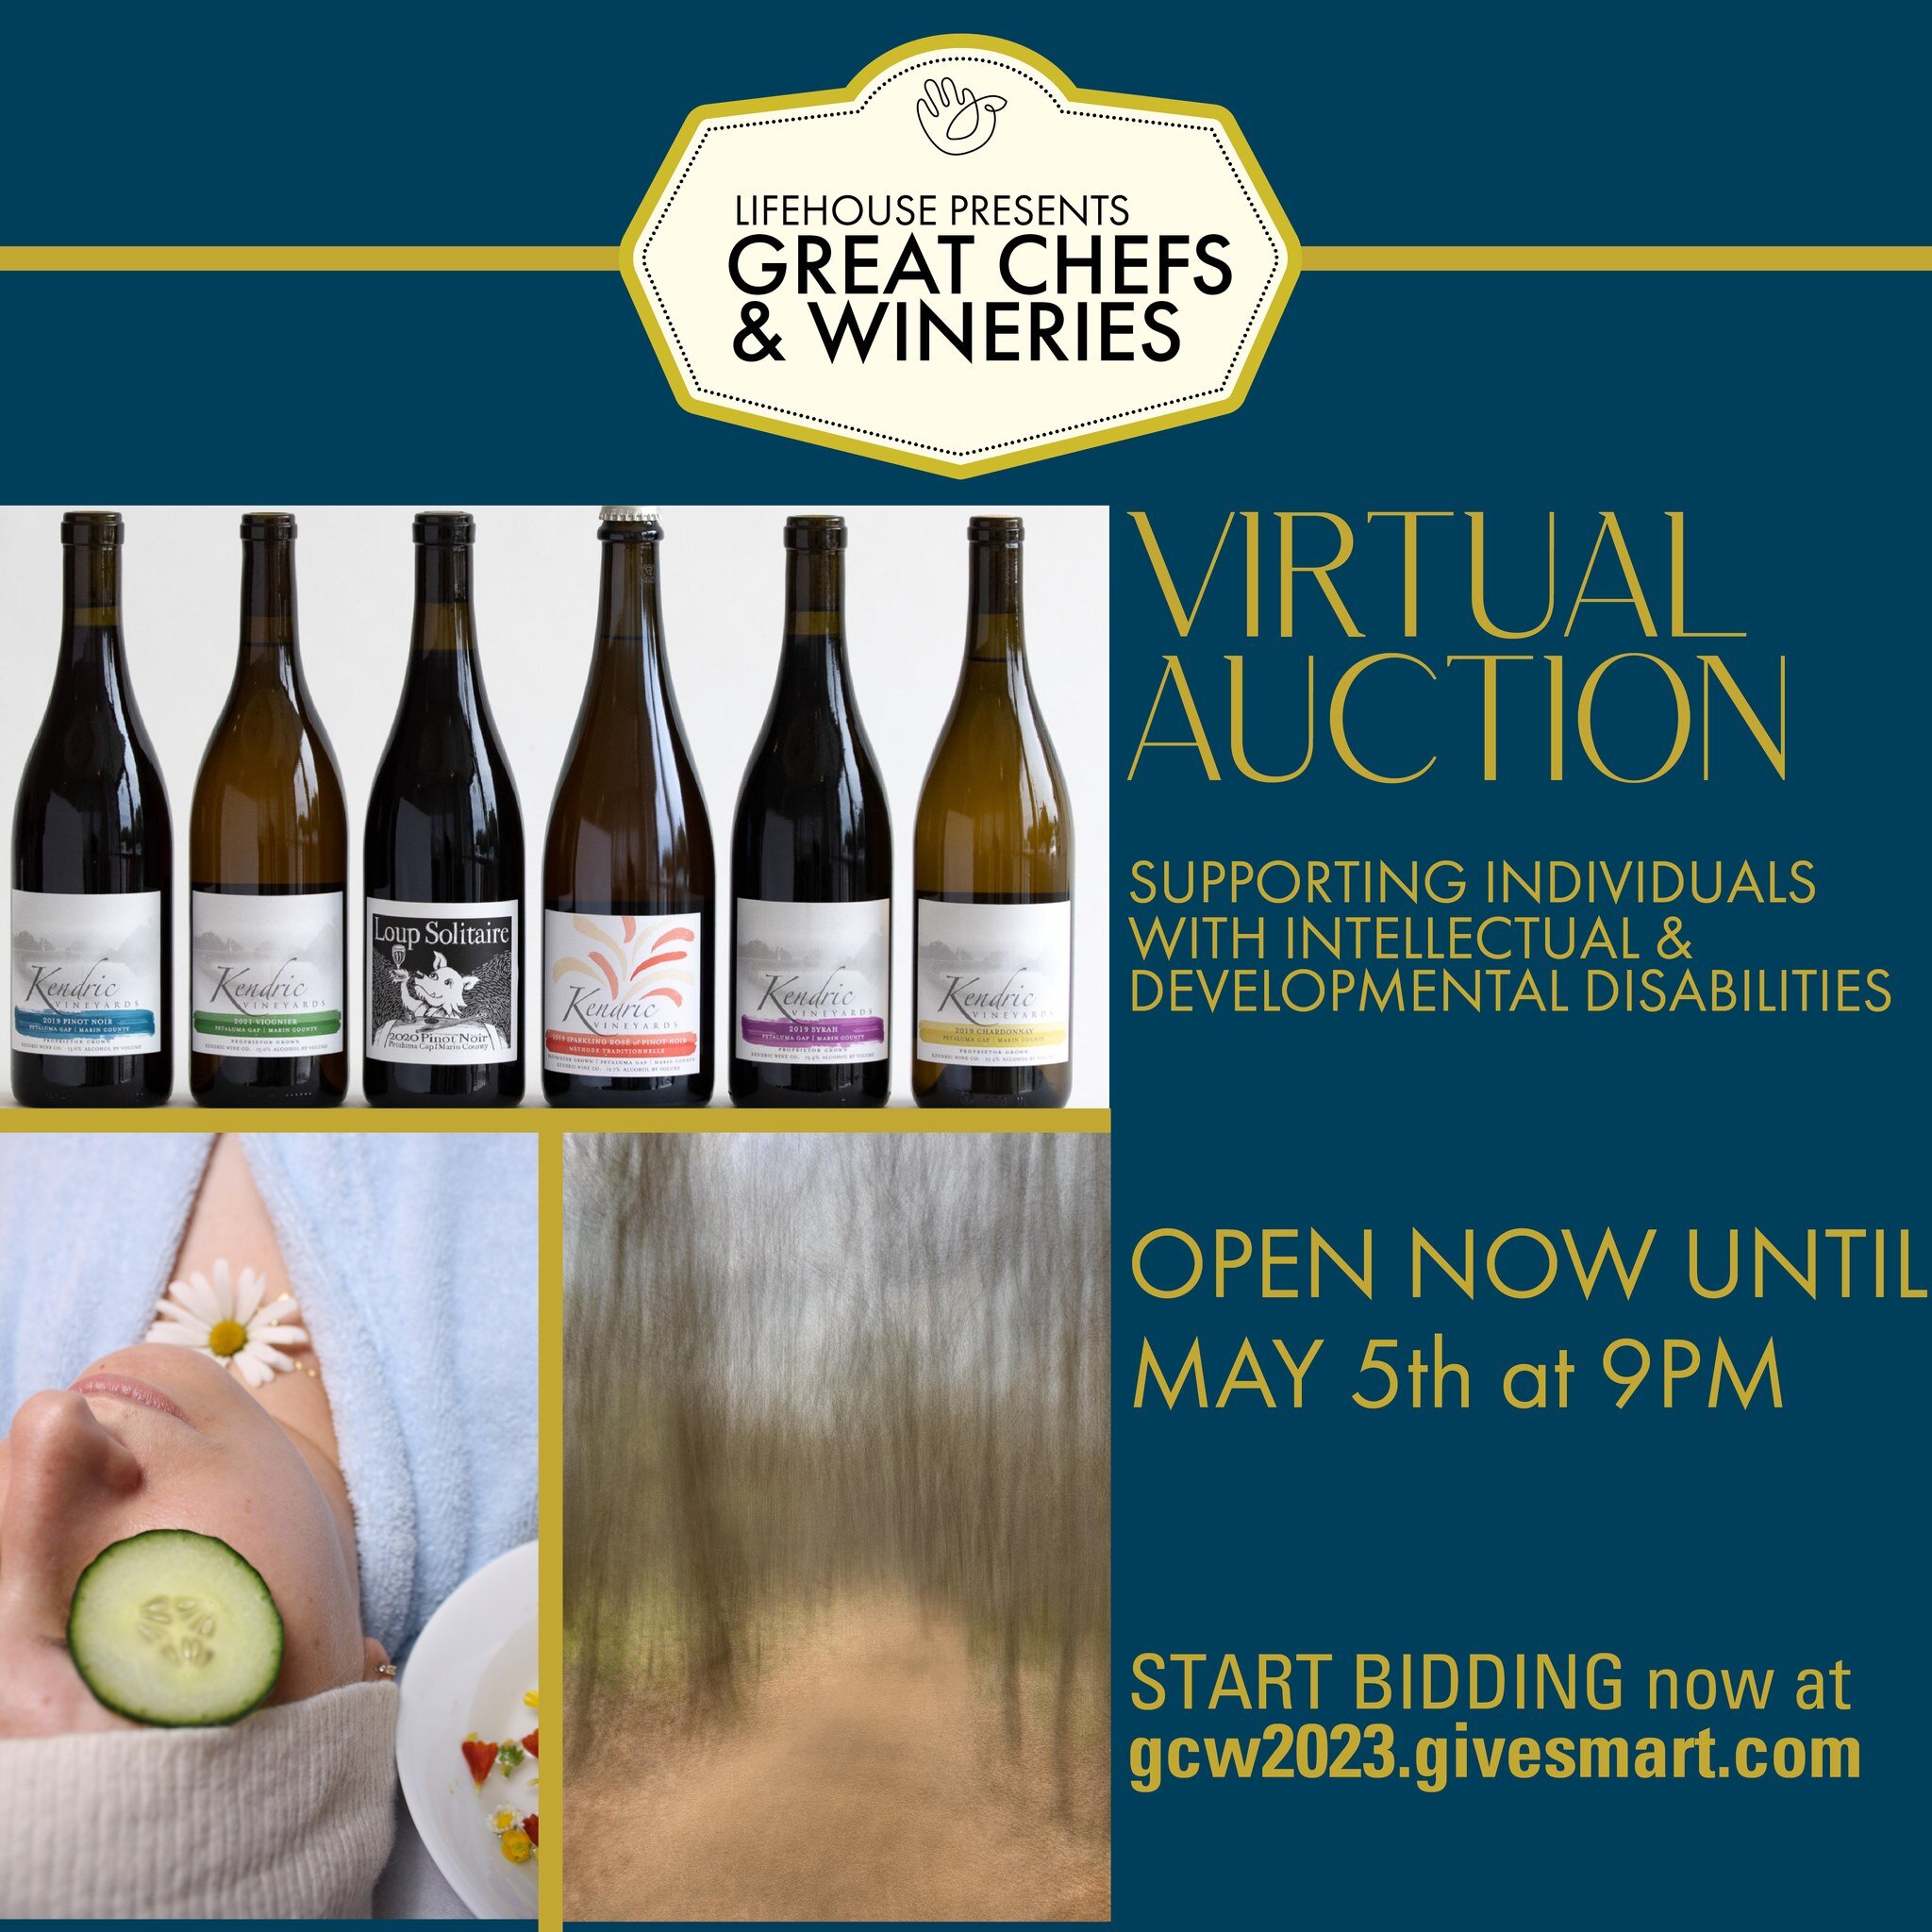 Be the first to bid on on these amazing items in our Great Chefs and Wineries virtual auction! #linkinbio👆 

#charityauction #gcw2023 #greatchefsandwineries #nonprofitfundraiser #nonprofitgala #bestincounty #bestmarinnonprofit #bestofmarin